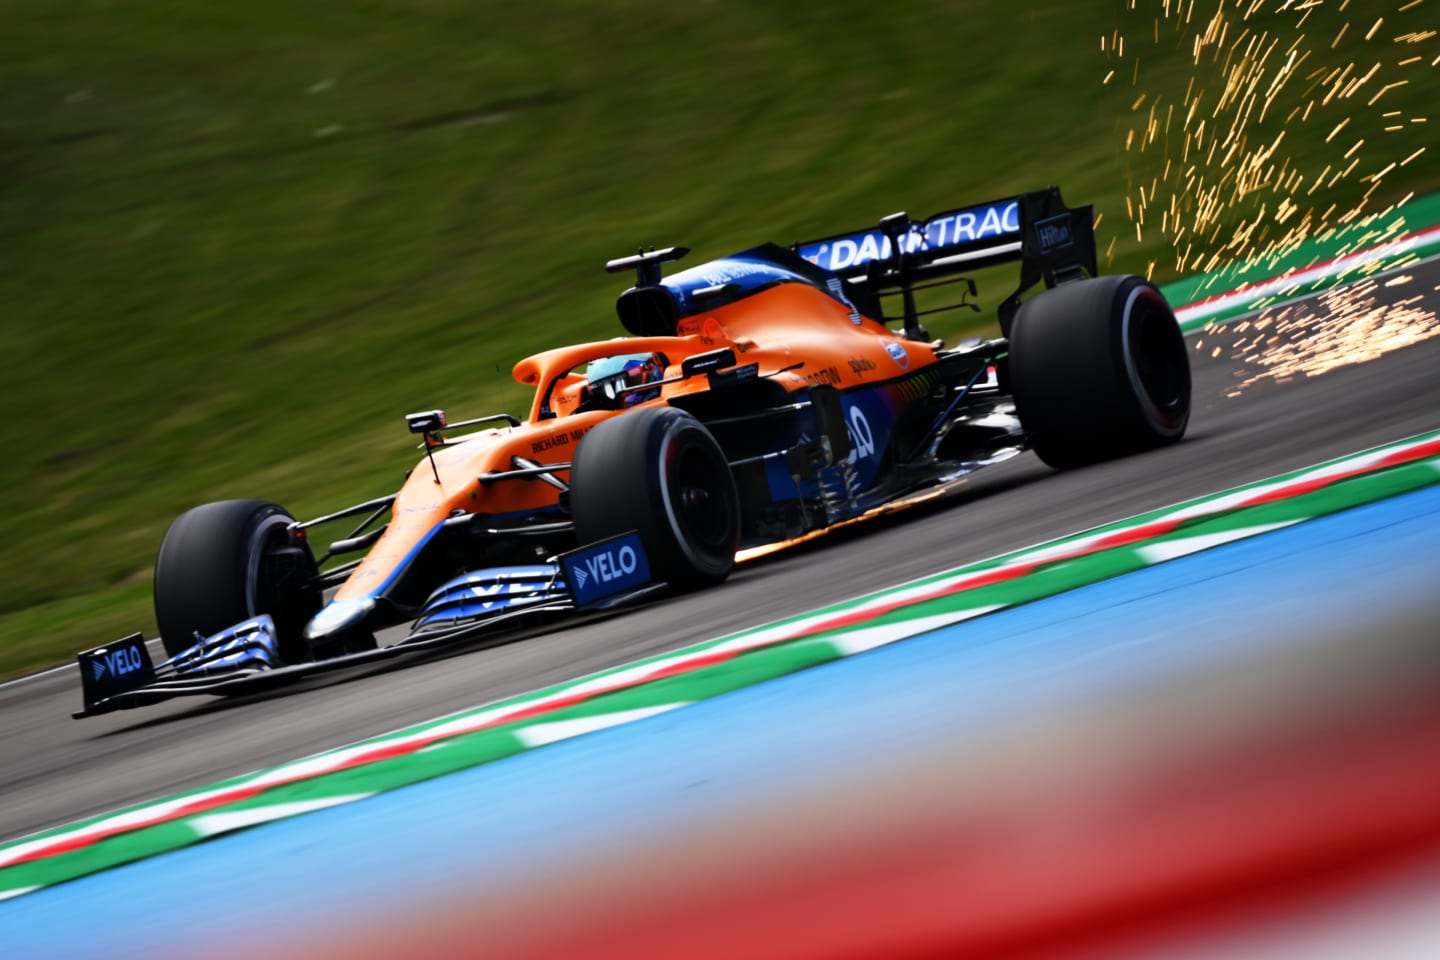 IMOLA, ITALY - APRIL 16: Sparks fly from the car of Daniel Ricciardo of Australia driving the (3) McLaren F1 Team MCL35M Mercedes during practice ahead of the F1 Grand Prix of Emilia Romagna at Autodromo Enzo e Dino Ferrari on April 16, 2021 in Imola, Italy. (Photo by Clive Mason - Formula 1/Formula 1 via Getty Images)